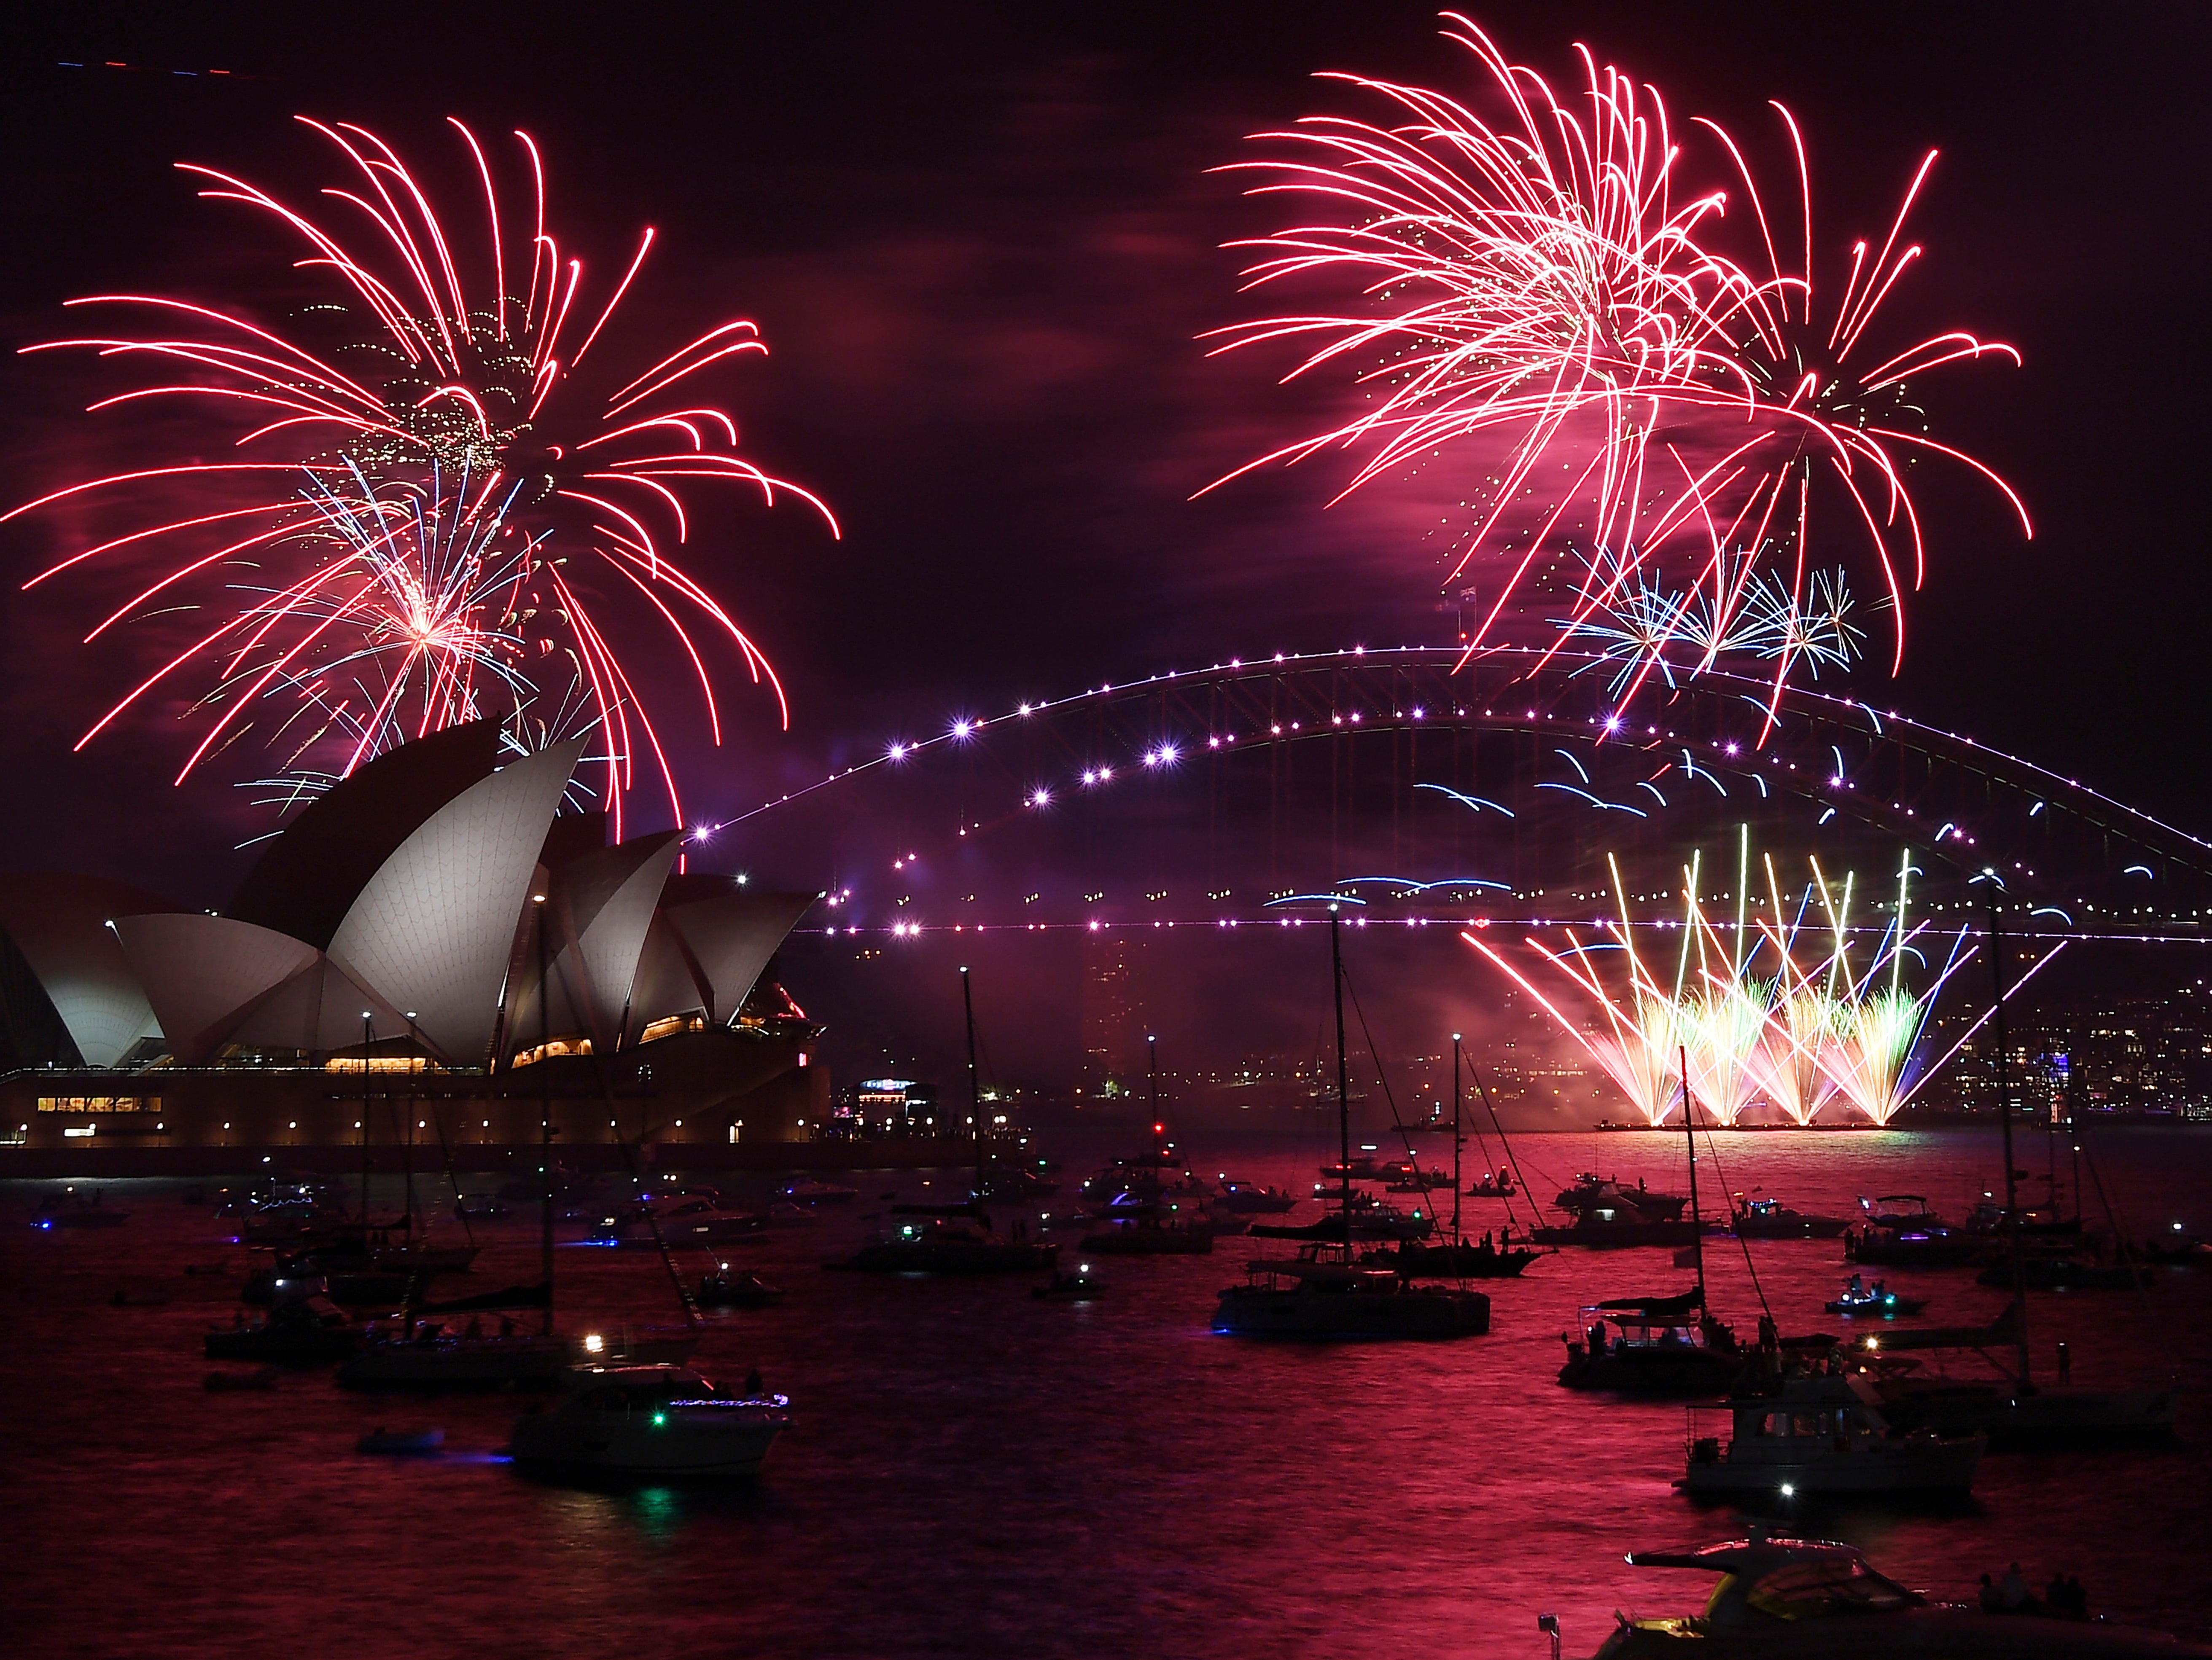 Fireworks explode over the Sydney Opera House and Harbour Bridge as New Year's Eve celebrations begin in Sydney